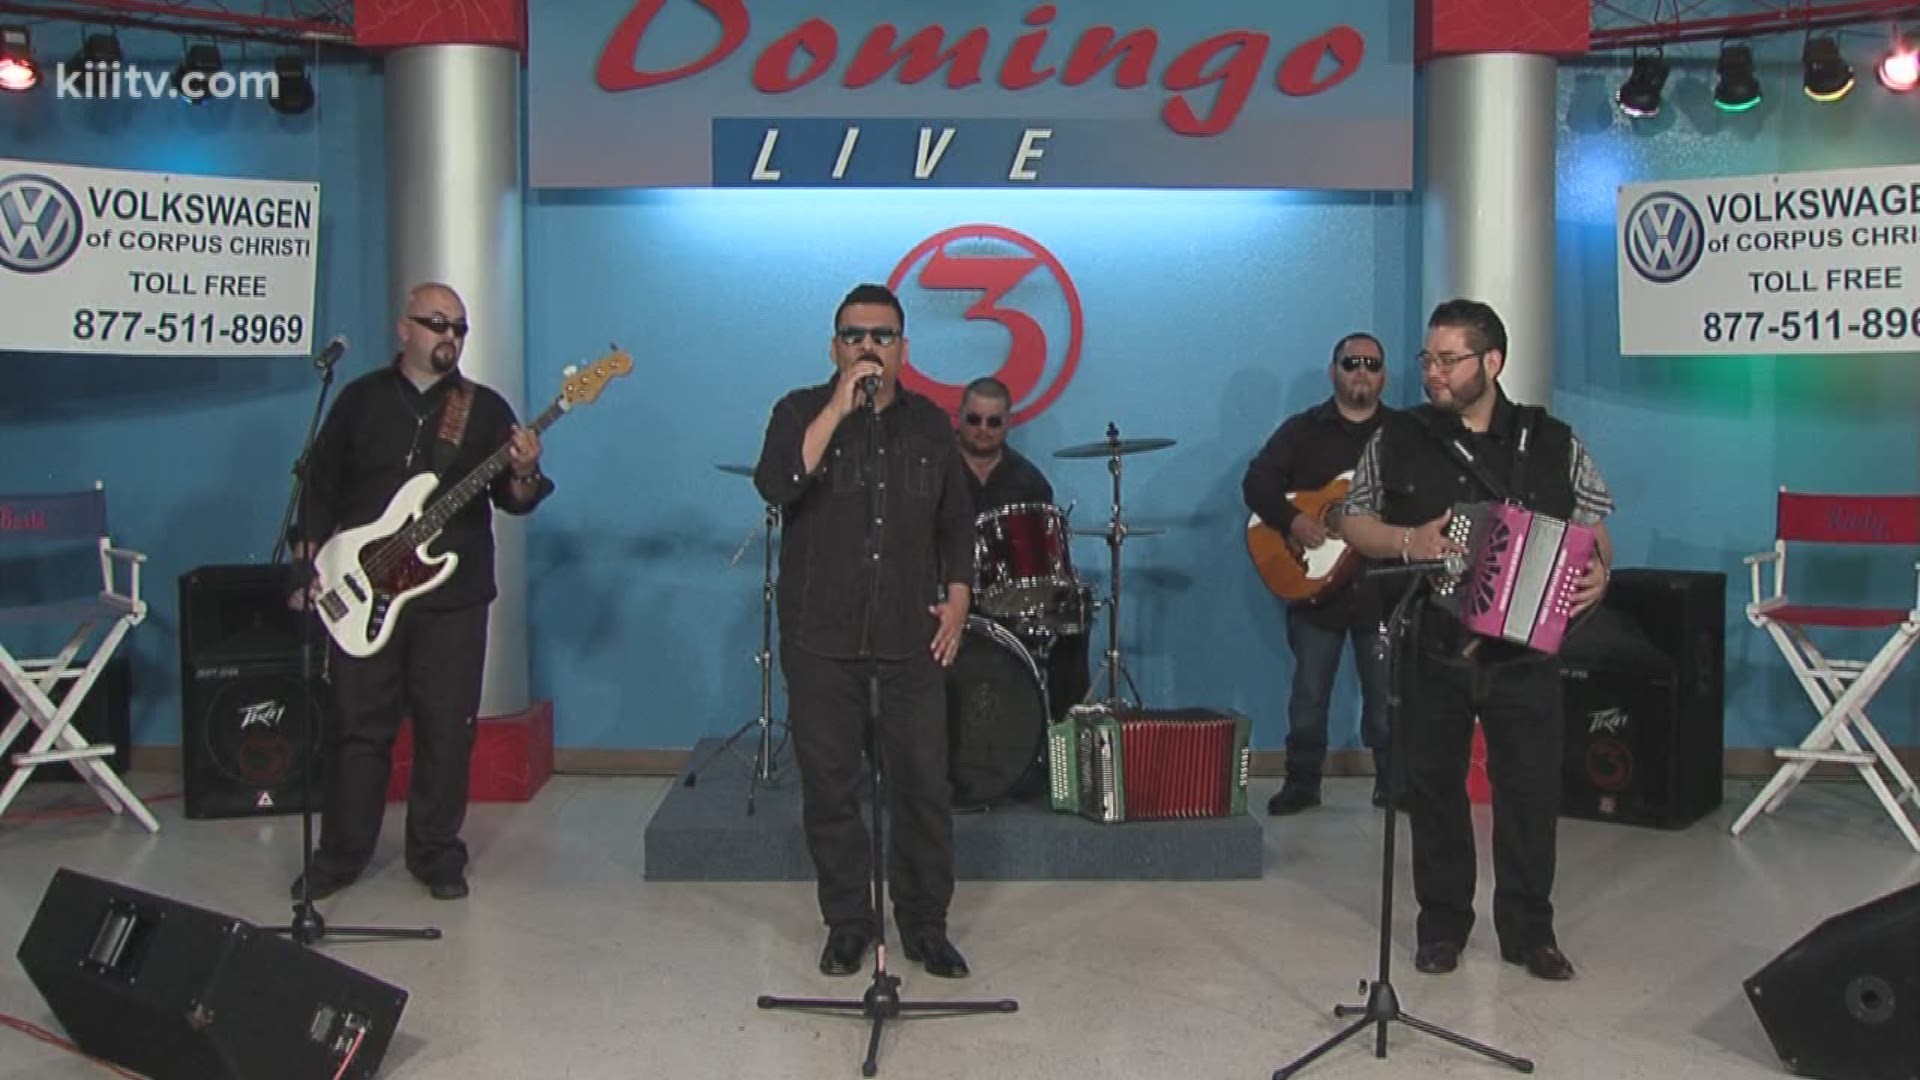 Tremendos Cinco from Corpus Christi, TX close out their performance set with the song "Ven Devorame Otra Vez" on Domingo Live!